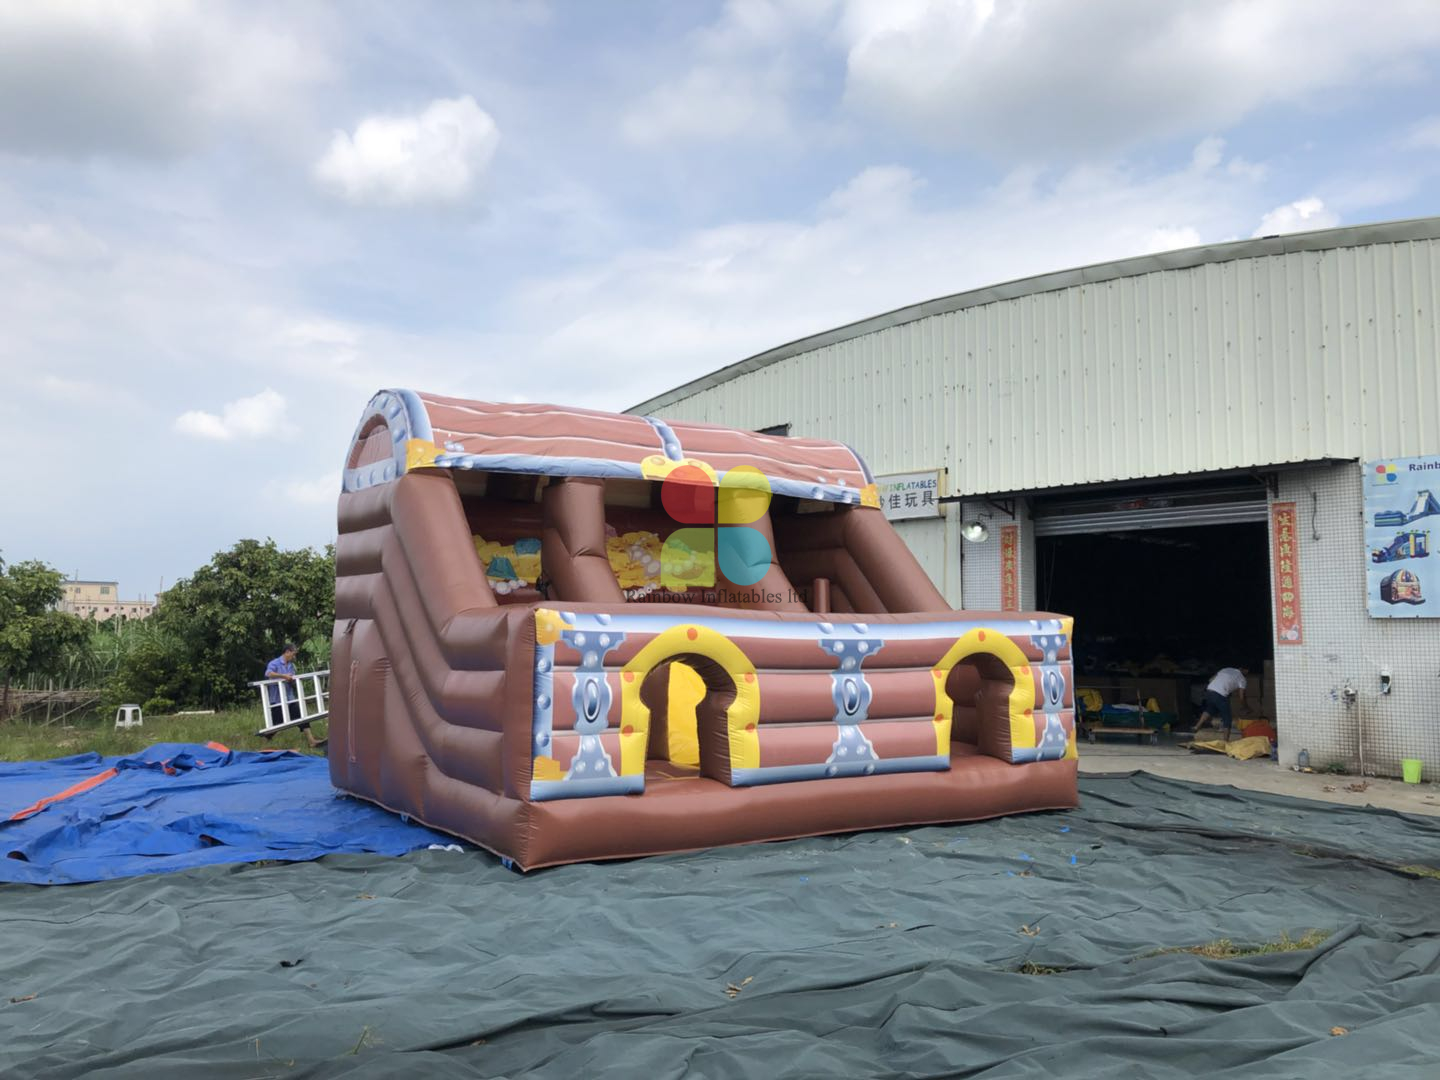 Pirate Treasure Chest Inflatable Slide